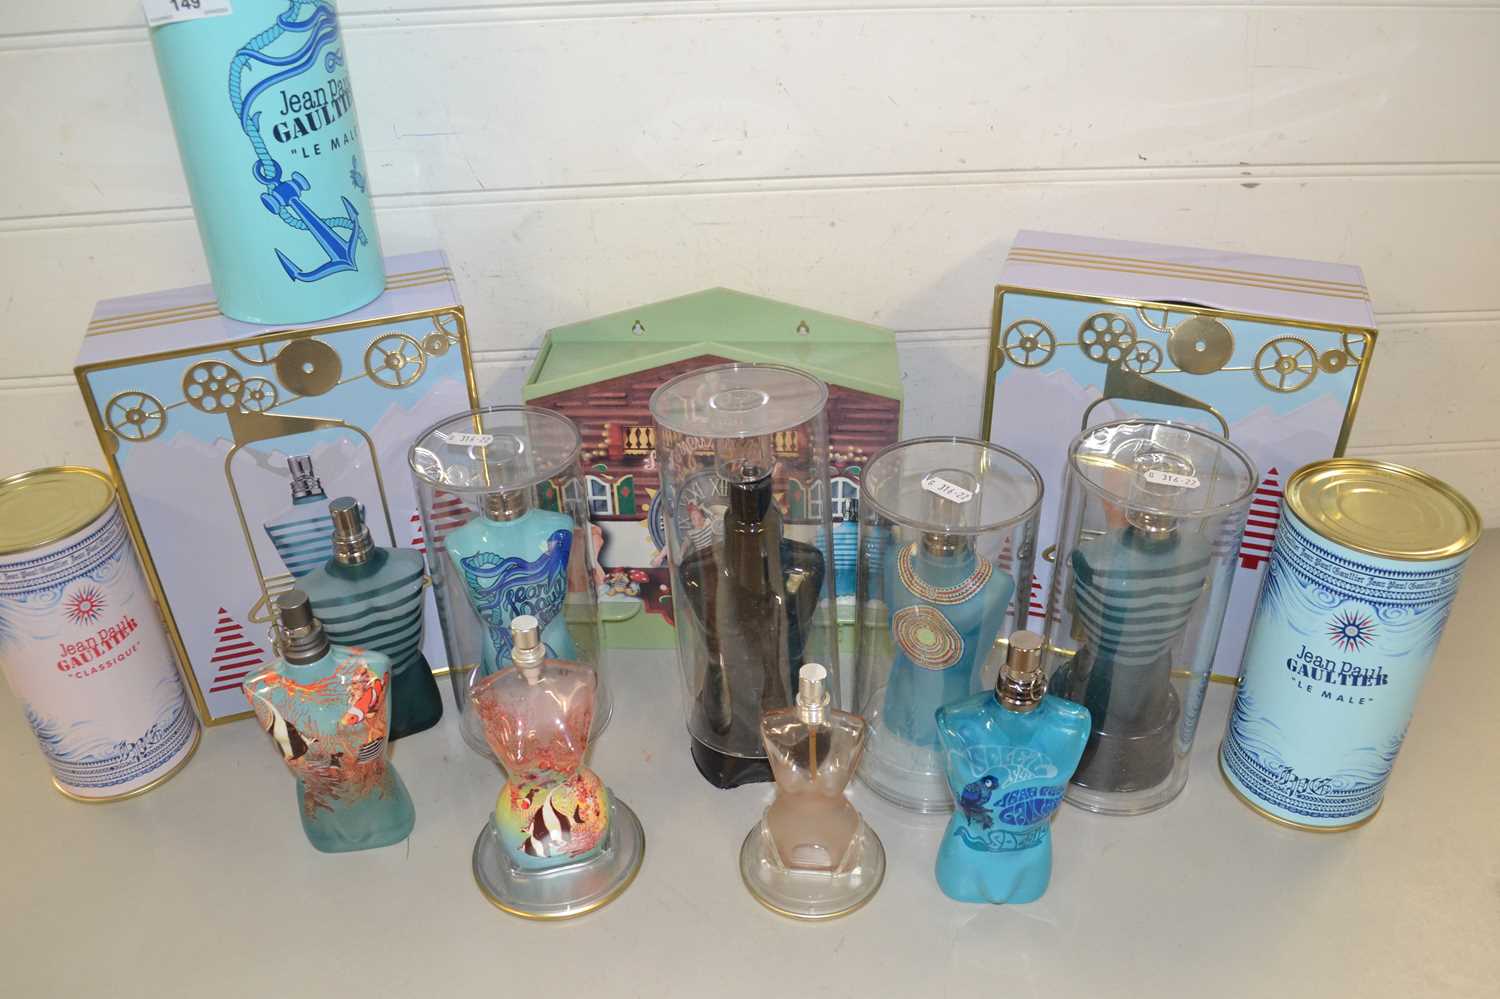 Collection of Jean Paul Gaultier perfume bottles (empty)